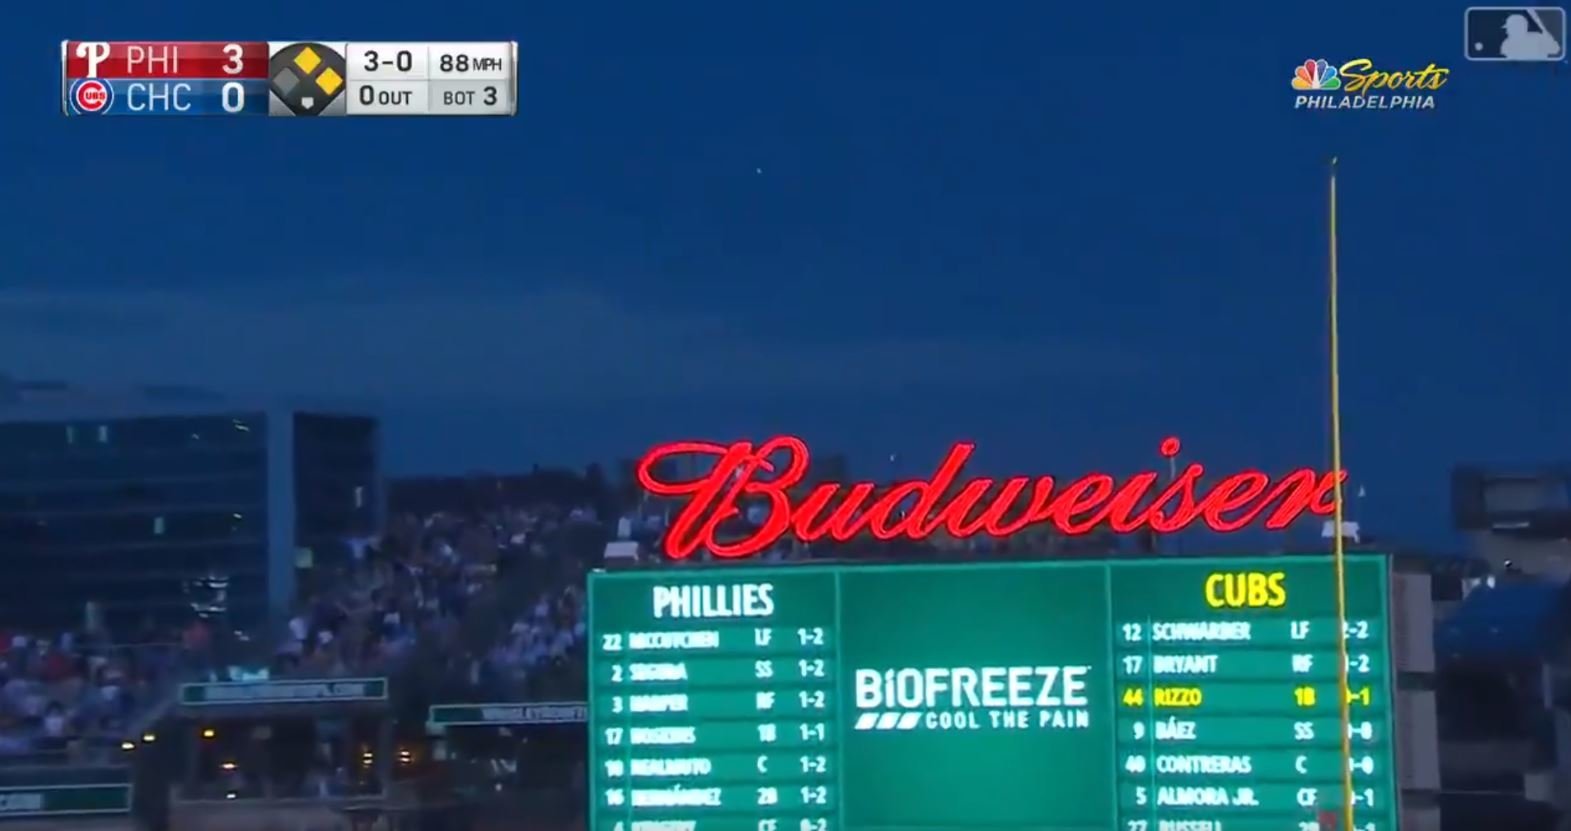 The iconic Budweiser sign at Wrigley Field might need to be checked for damage after Rizzo's blast careened into it. (Credit: Jim Young-USA TODAY Sports)